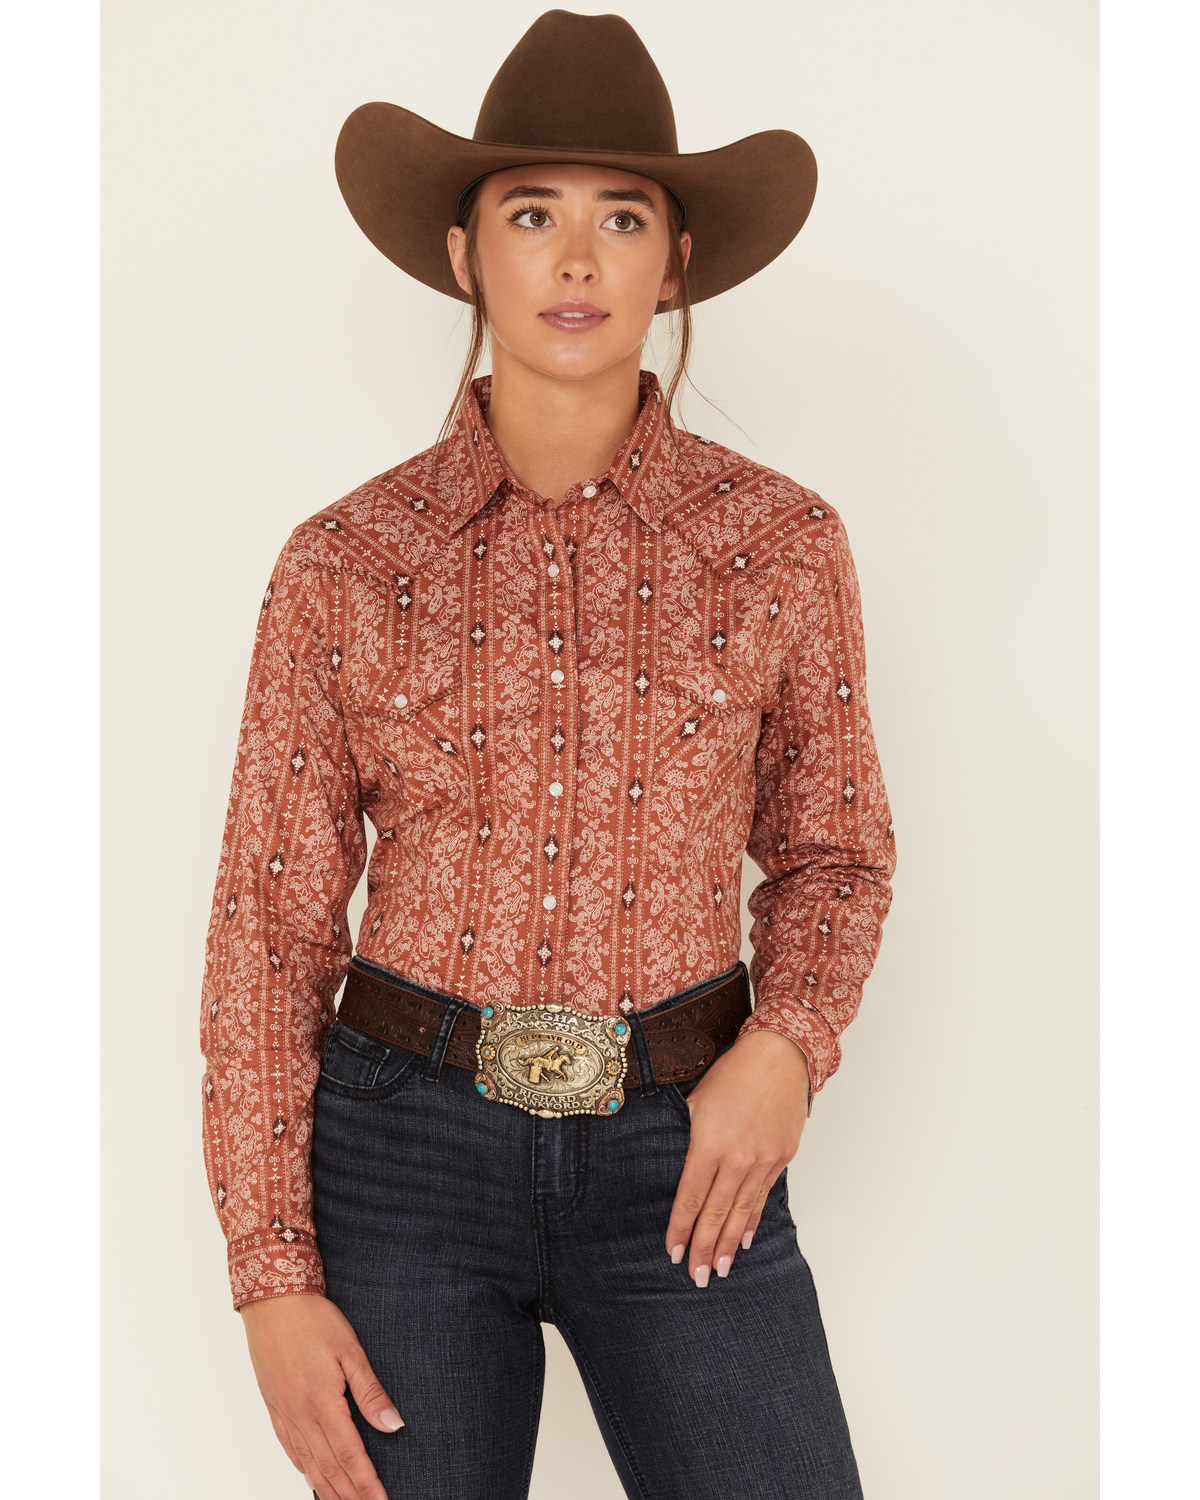 Rough Stock by Panhandle Women's Long Sleeve Snap Western Shirt